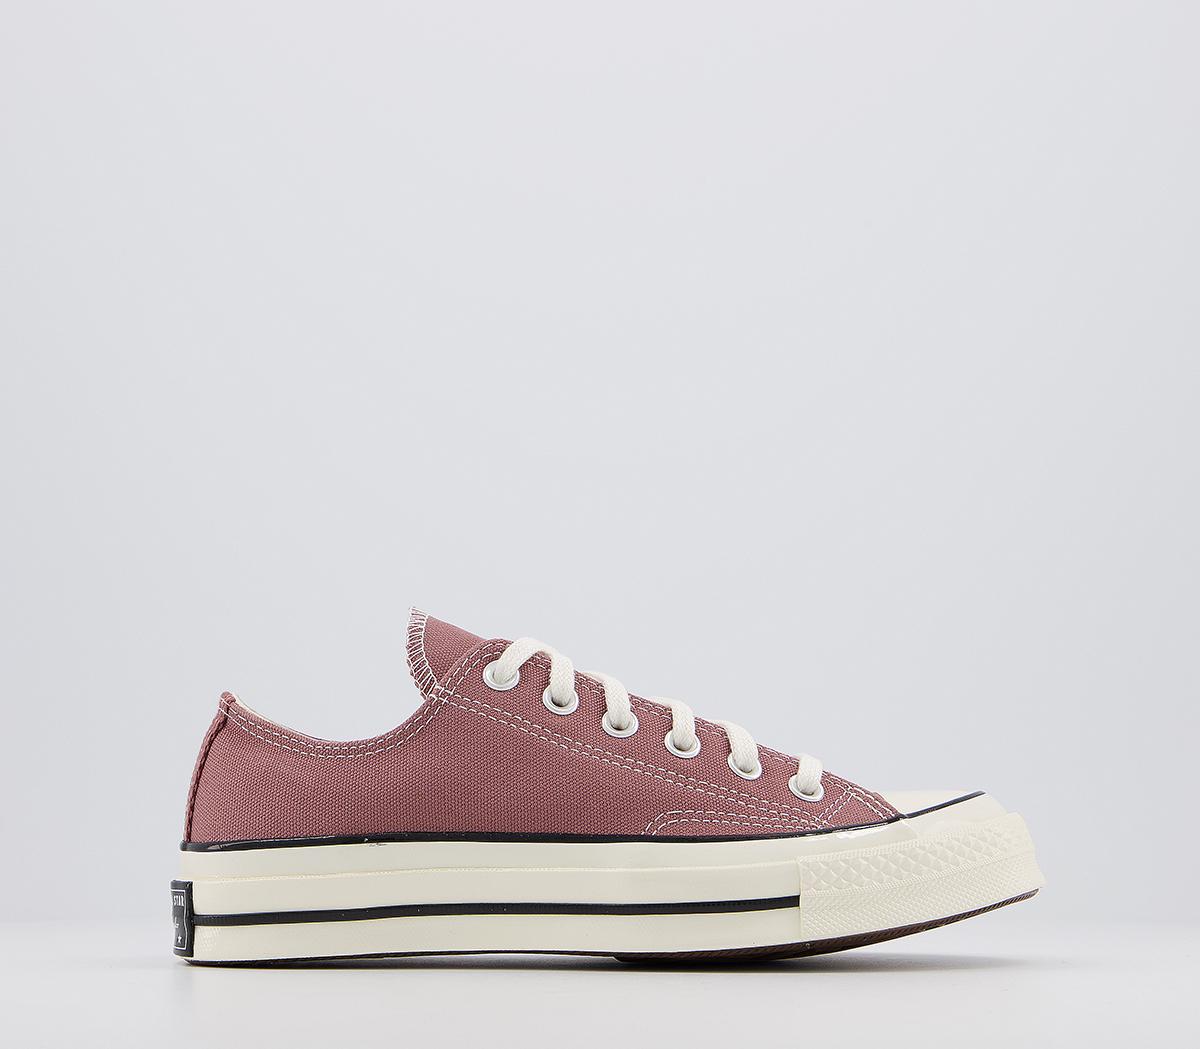 ConverseAll Star Ox 70s TrainersSaddle Egret Black